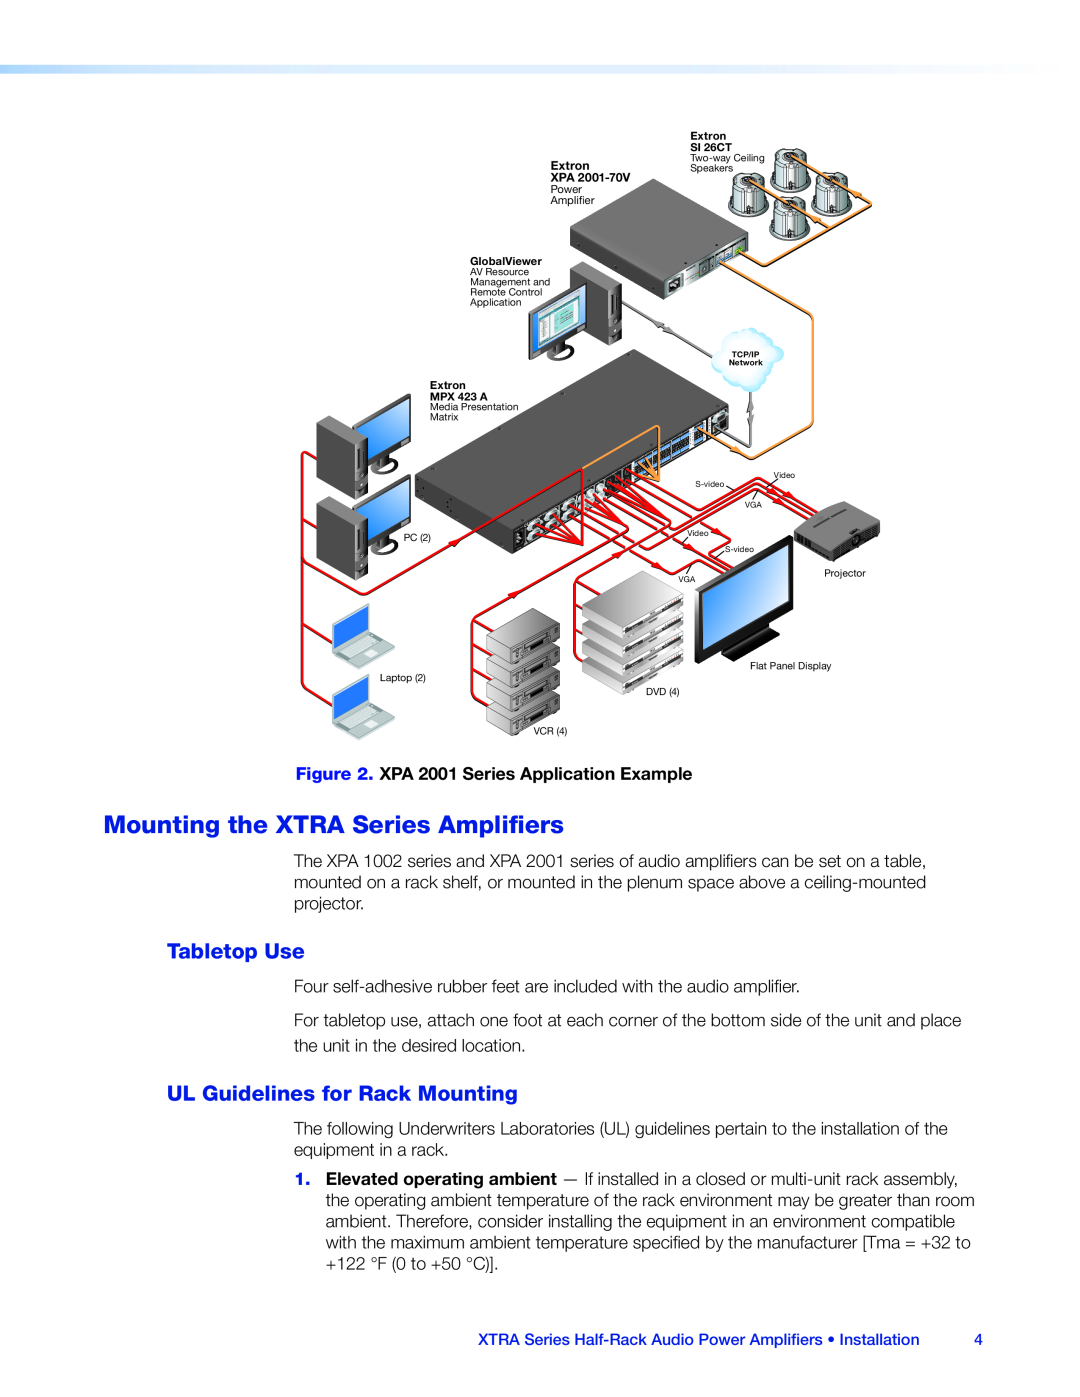 Extron electronic XTRA SERIES manual Mounting the XTRA Series Amplifiers, Tabletop Use, UL Guidelines for Rack Mounting 